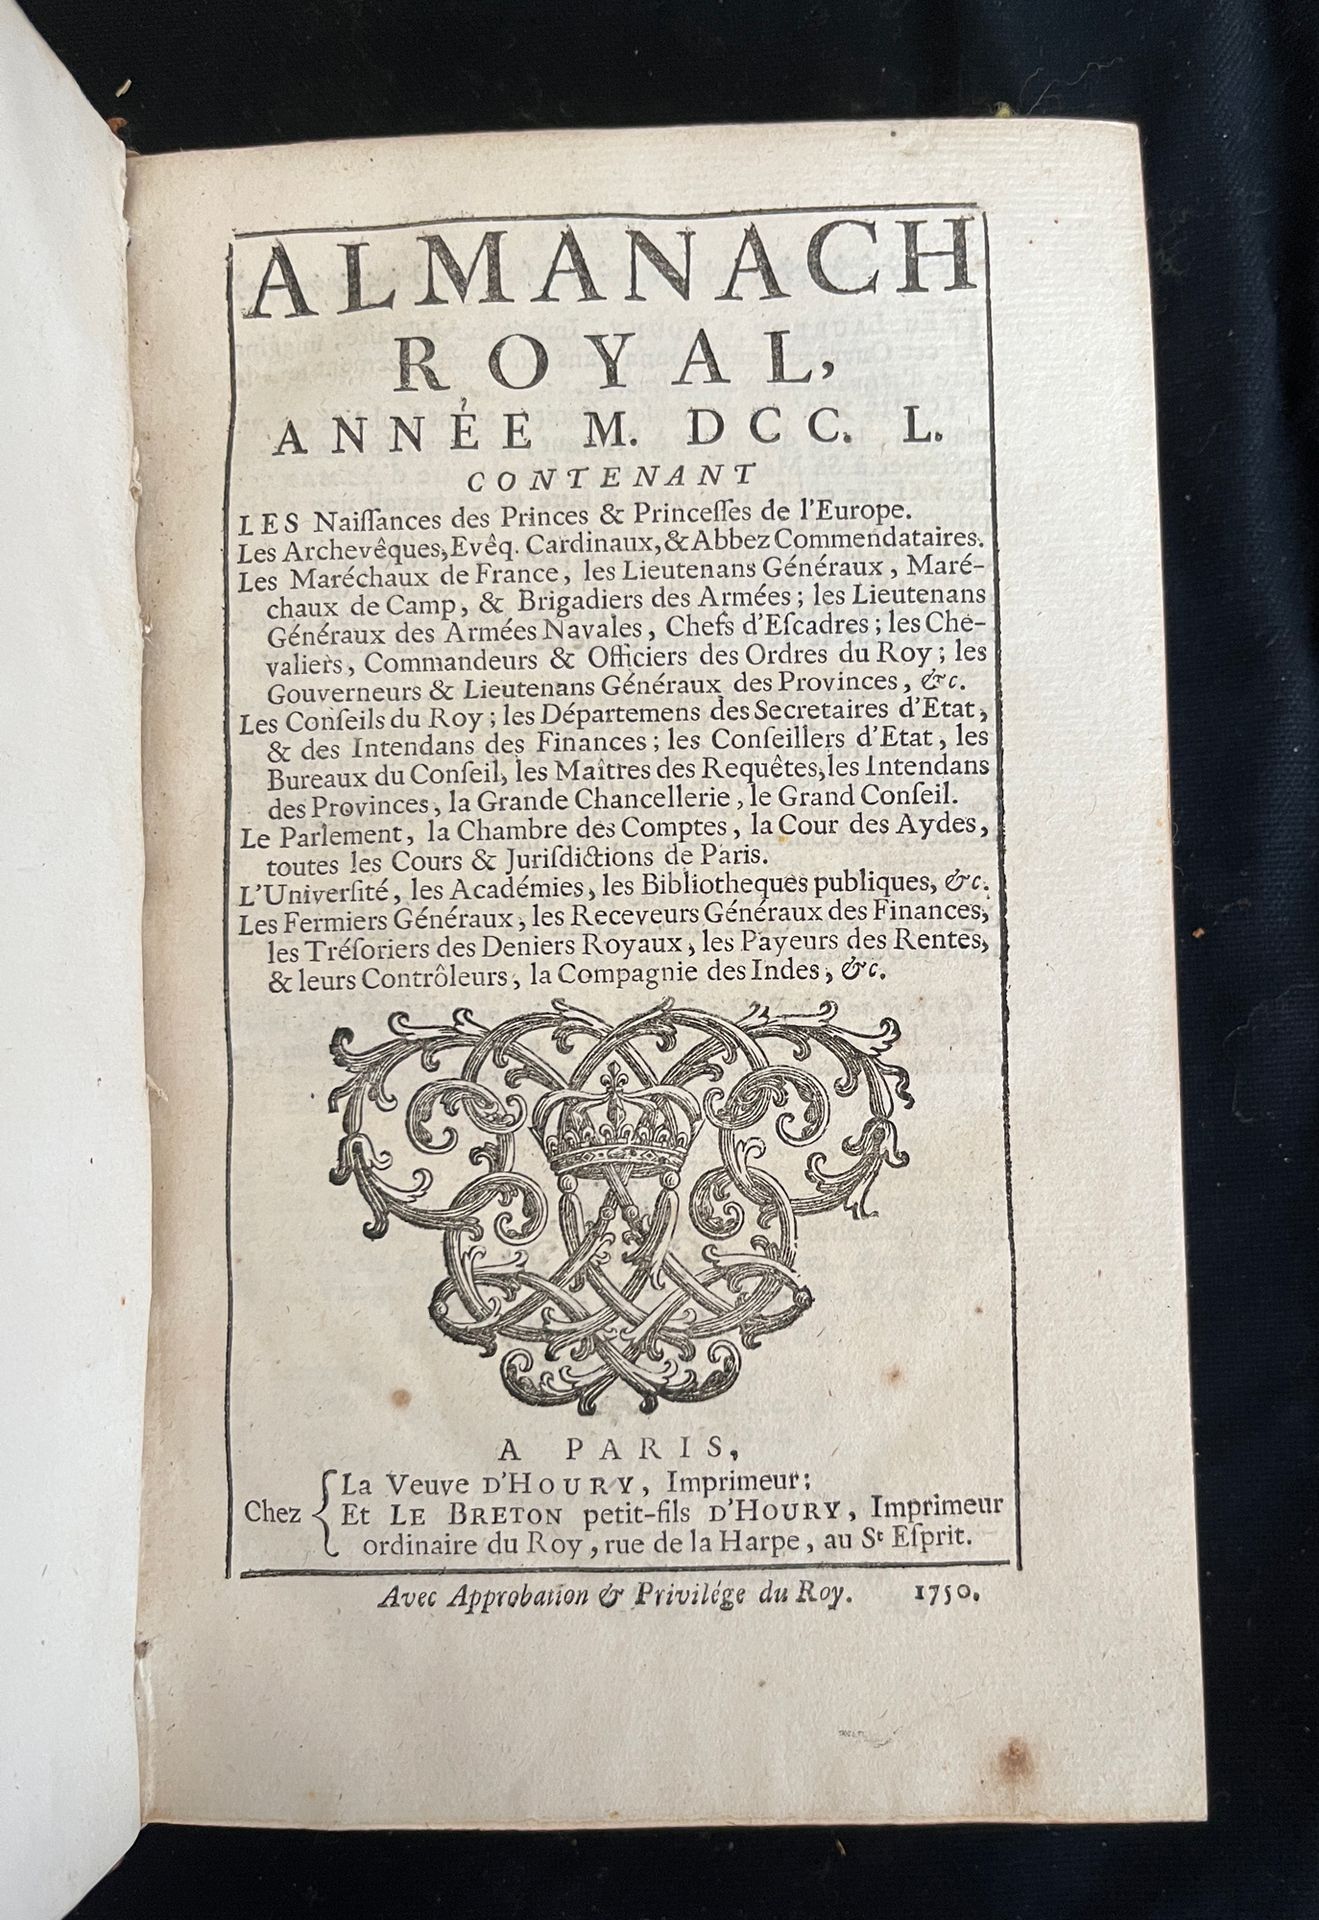 Null [ALMANACH]
Royal Almanac for the year MDCCL. Paris at the home of the widow&hellip;